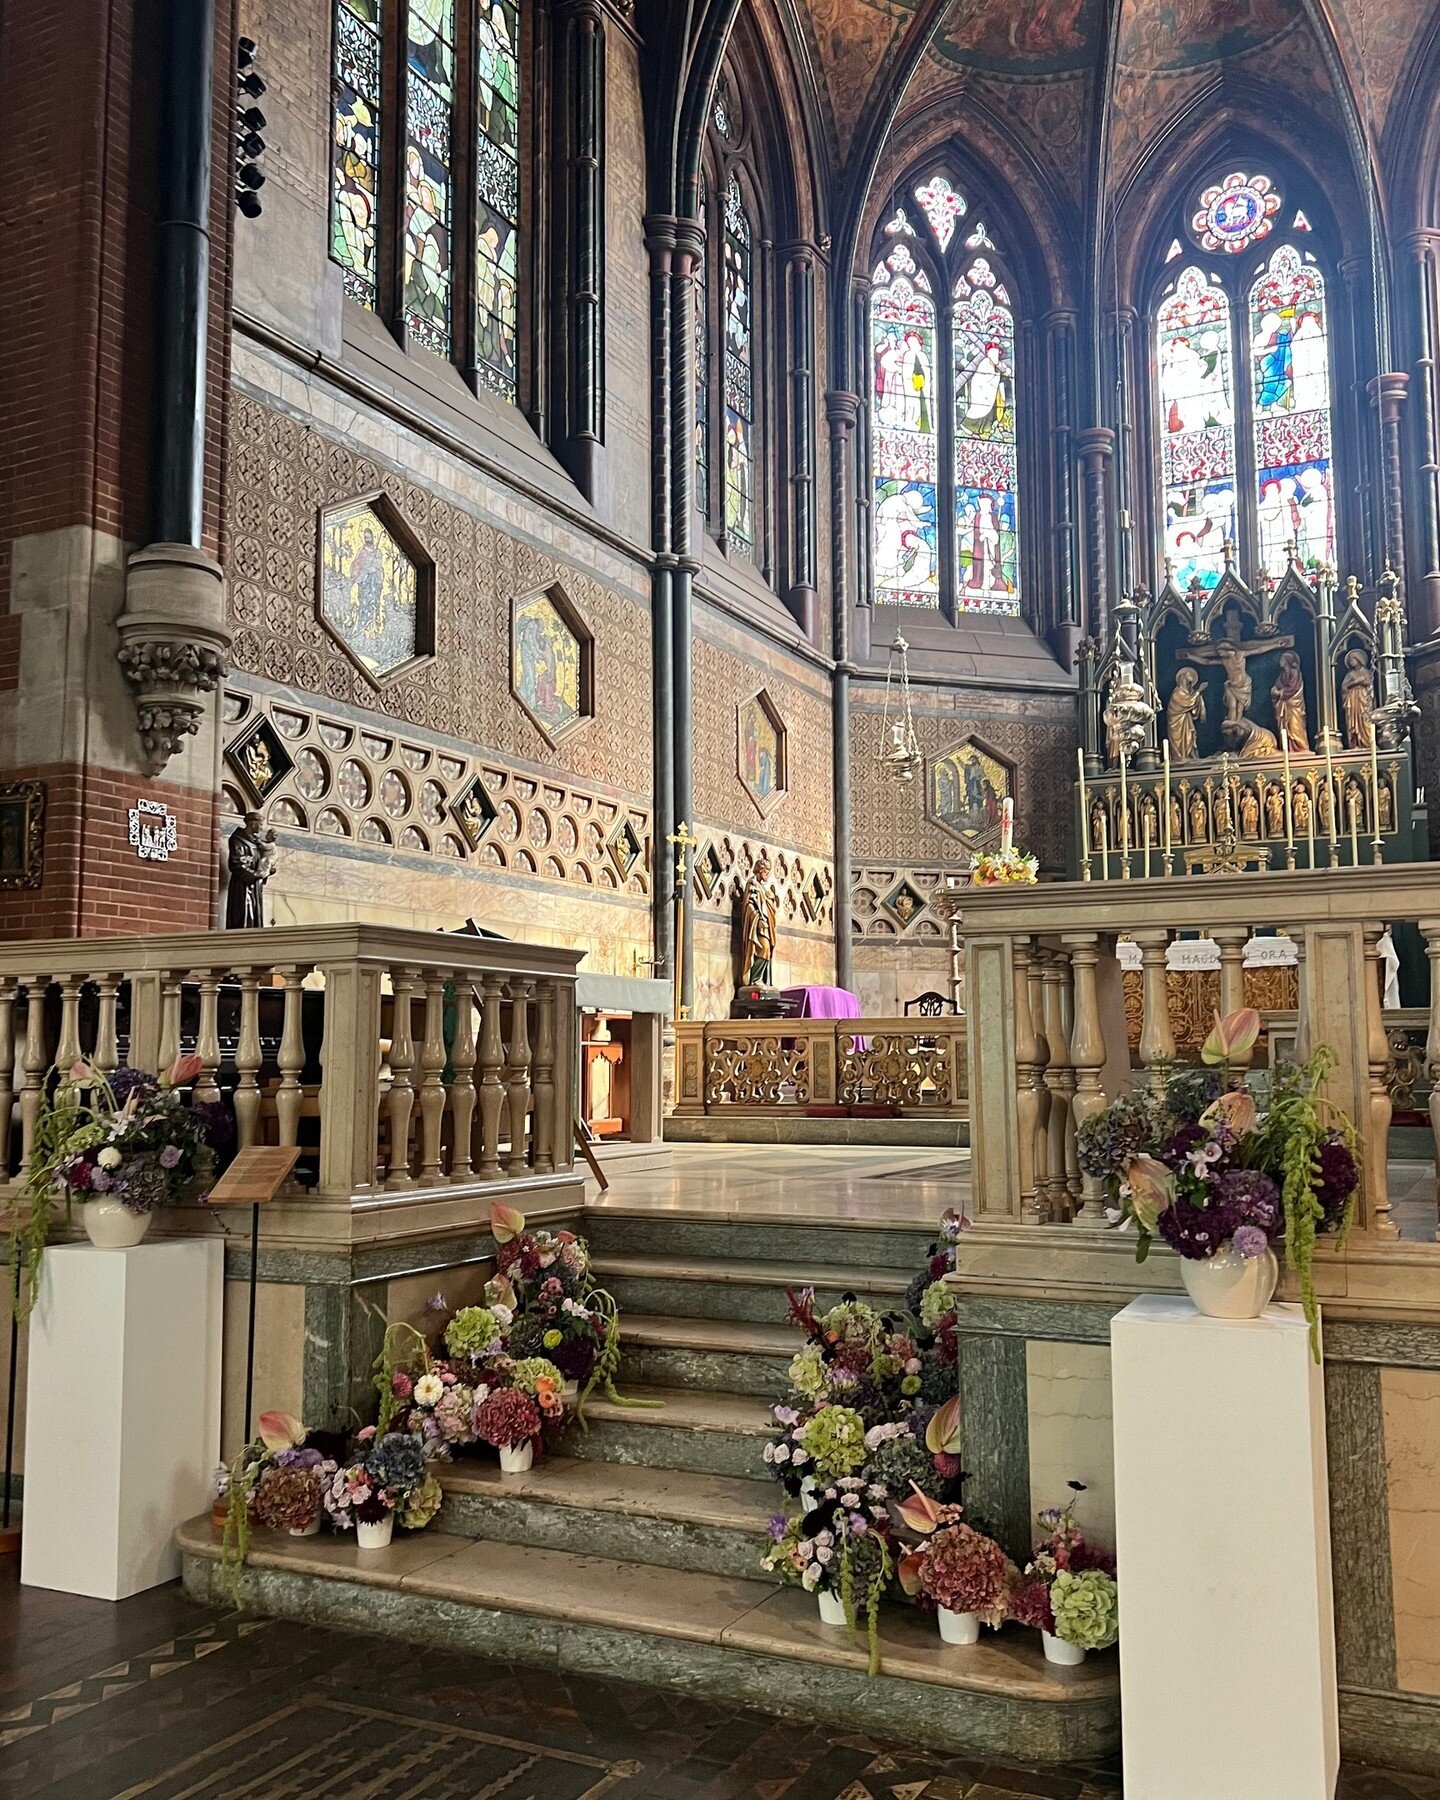 Repeat after me - church weddings can be edgy too 

Lots of drama for H + E the other week at the beautiful St Mary Magdalene Church @grandjunctionw2

Email us to discuss your wedding or event florals 💌